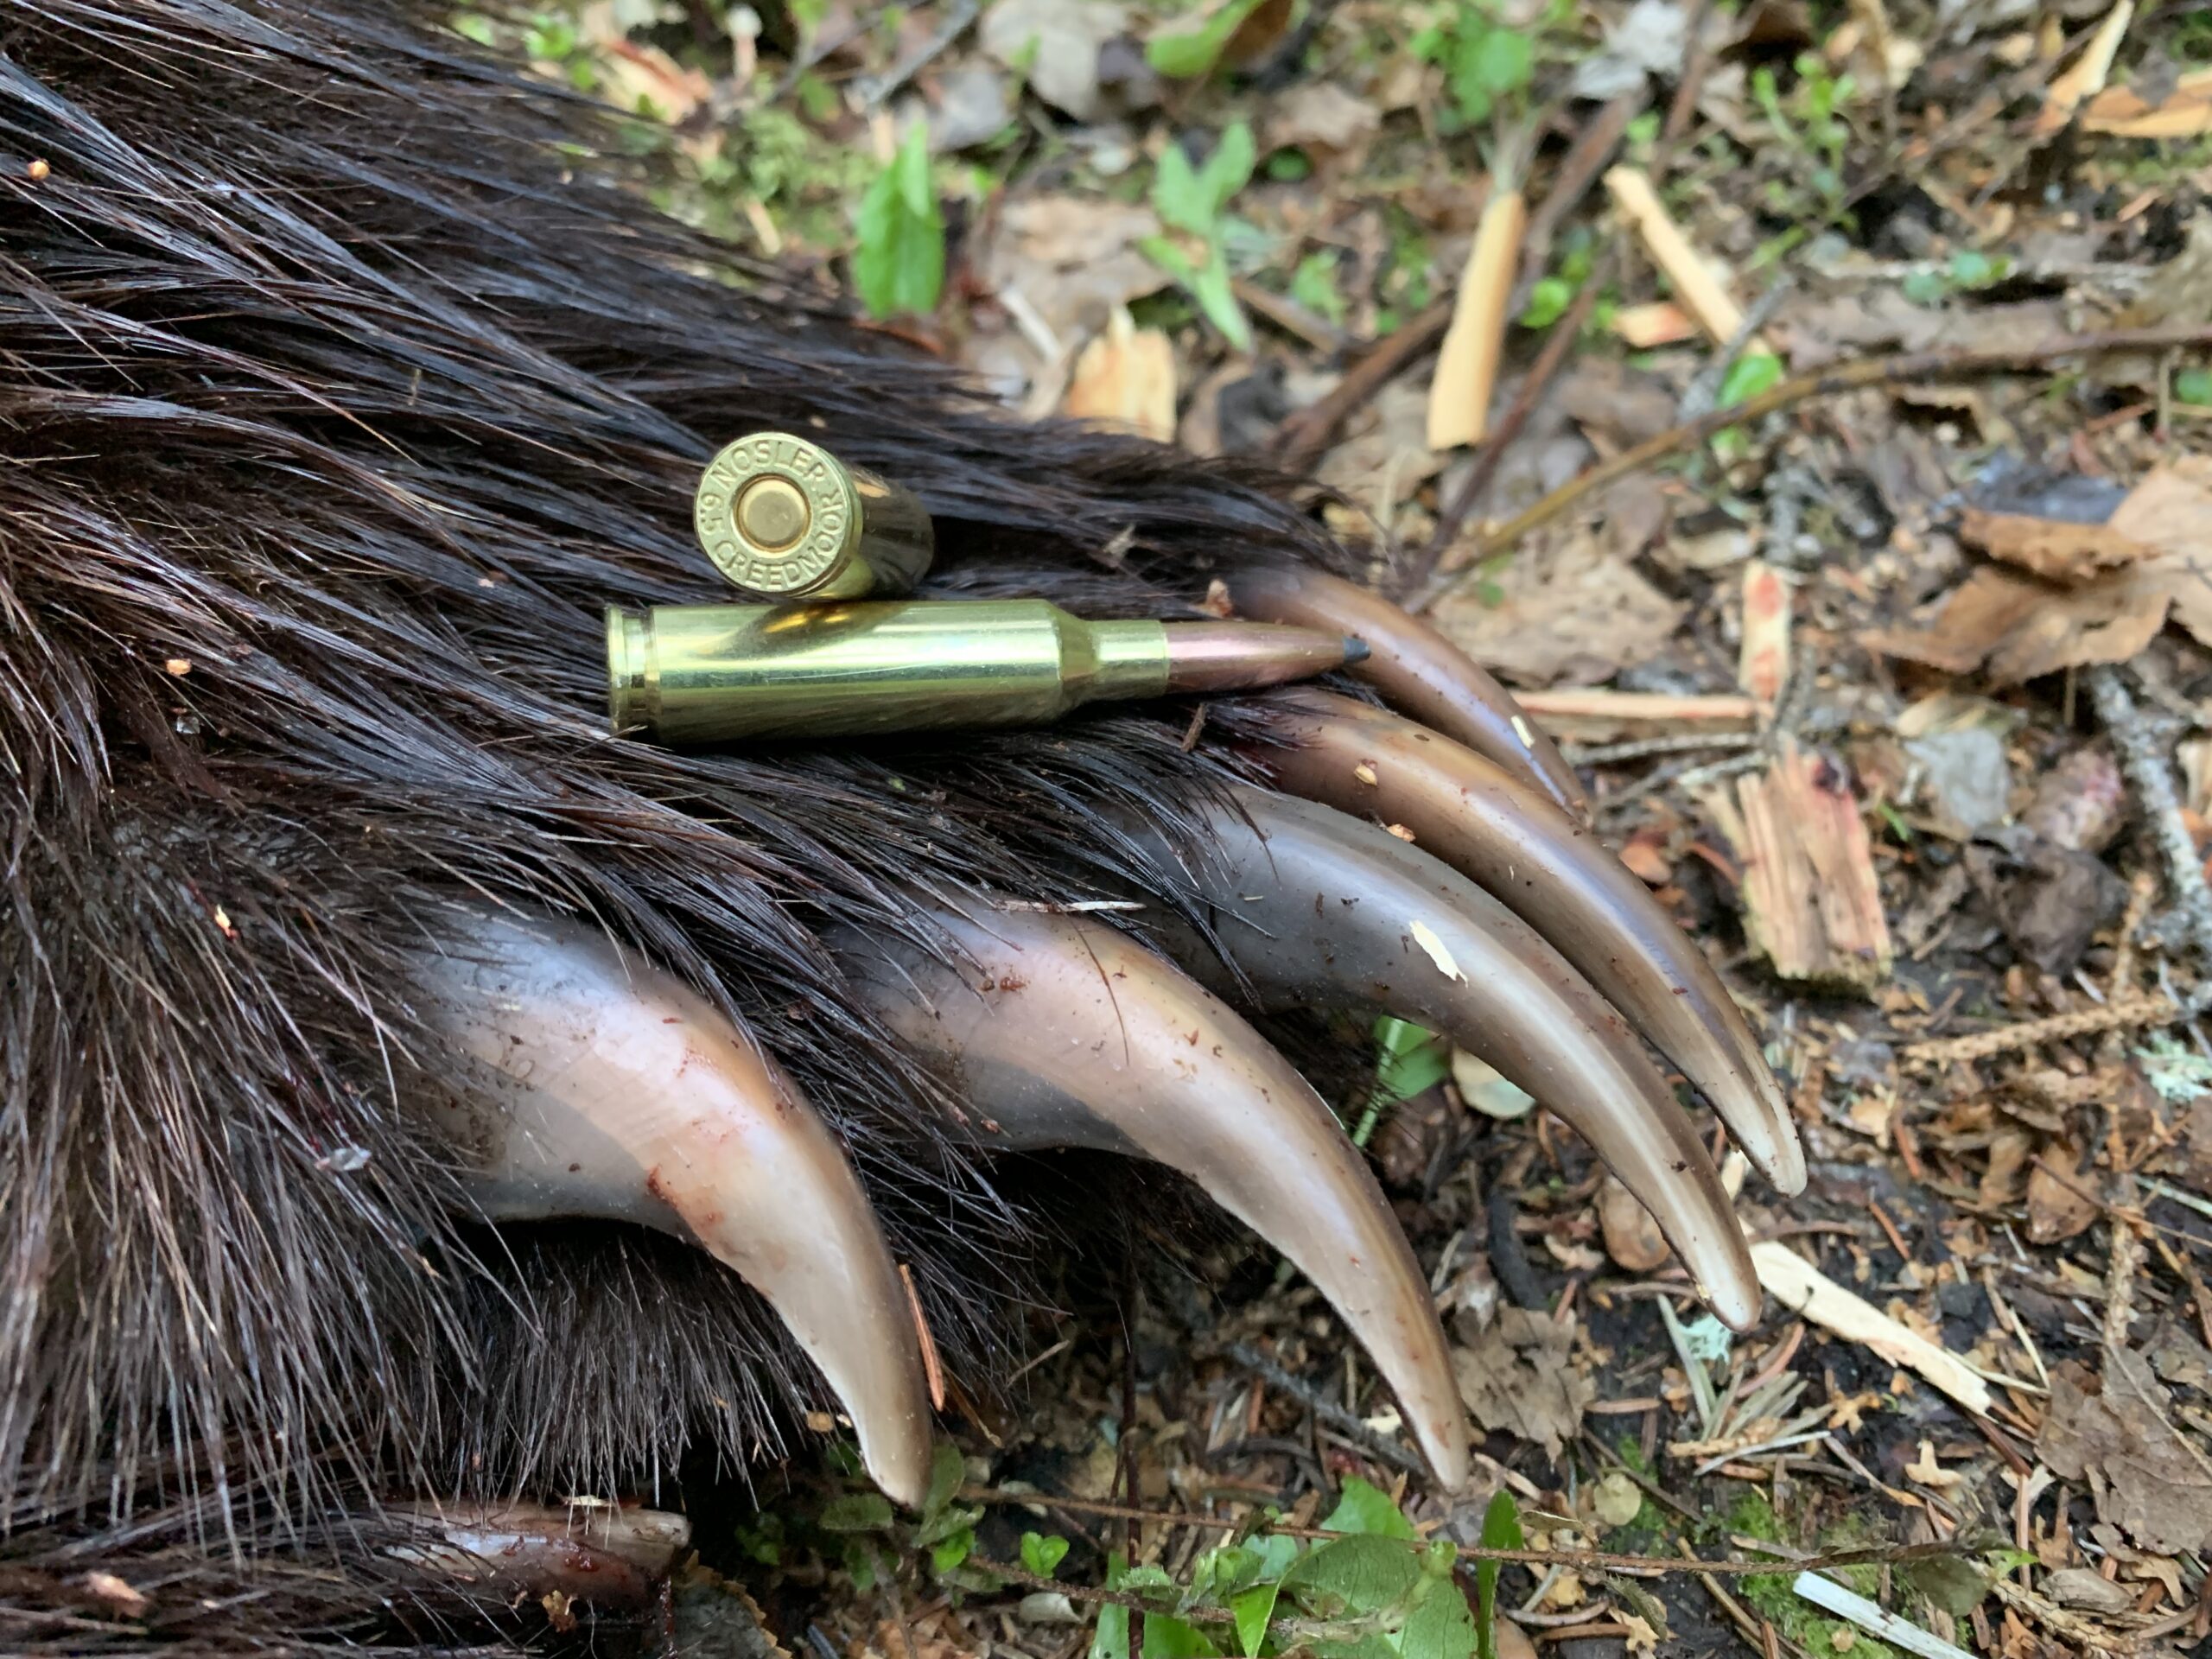 Grizzly paw and 6.5 Creedmoor cartridges